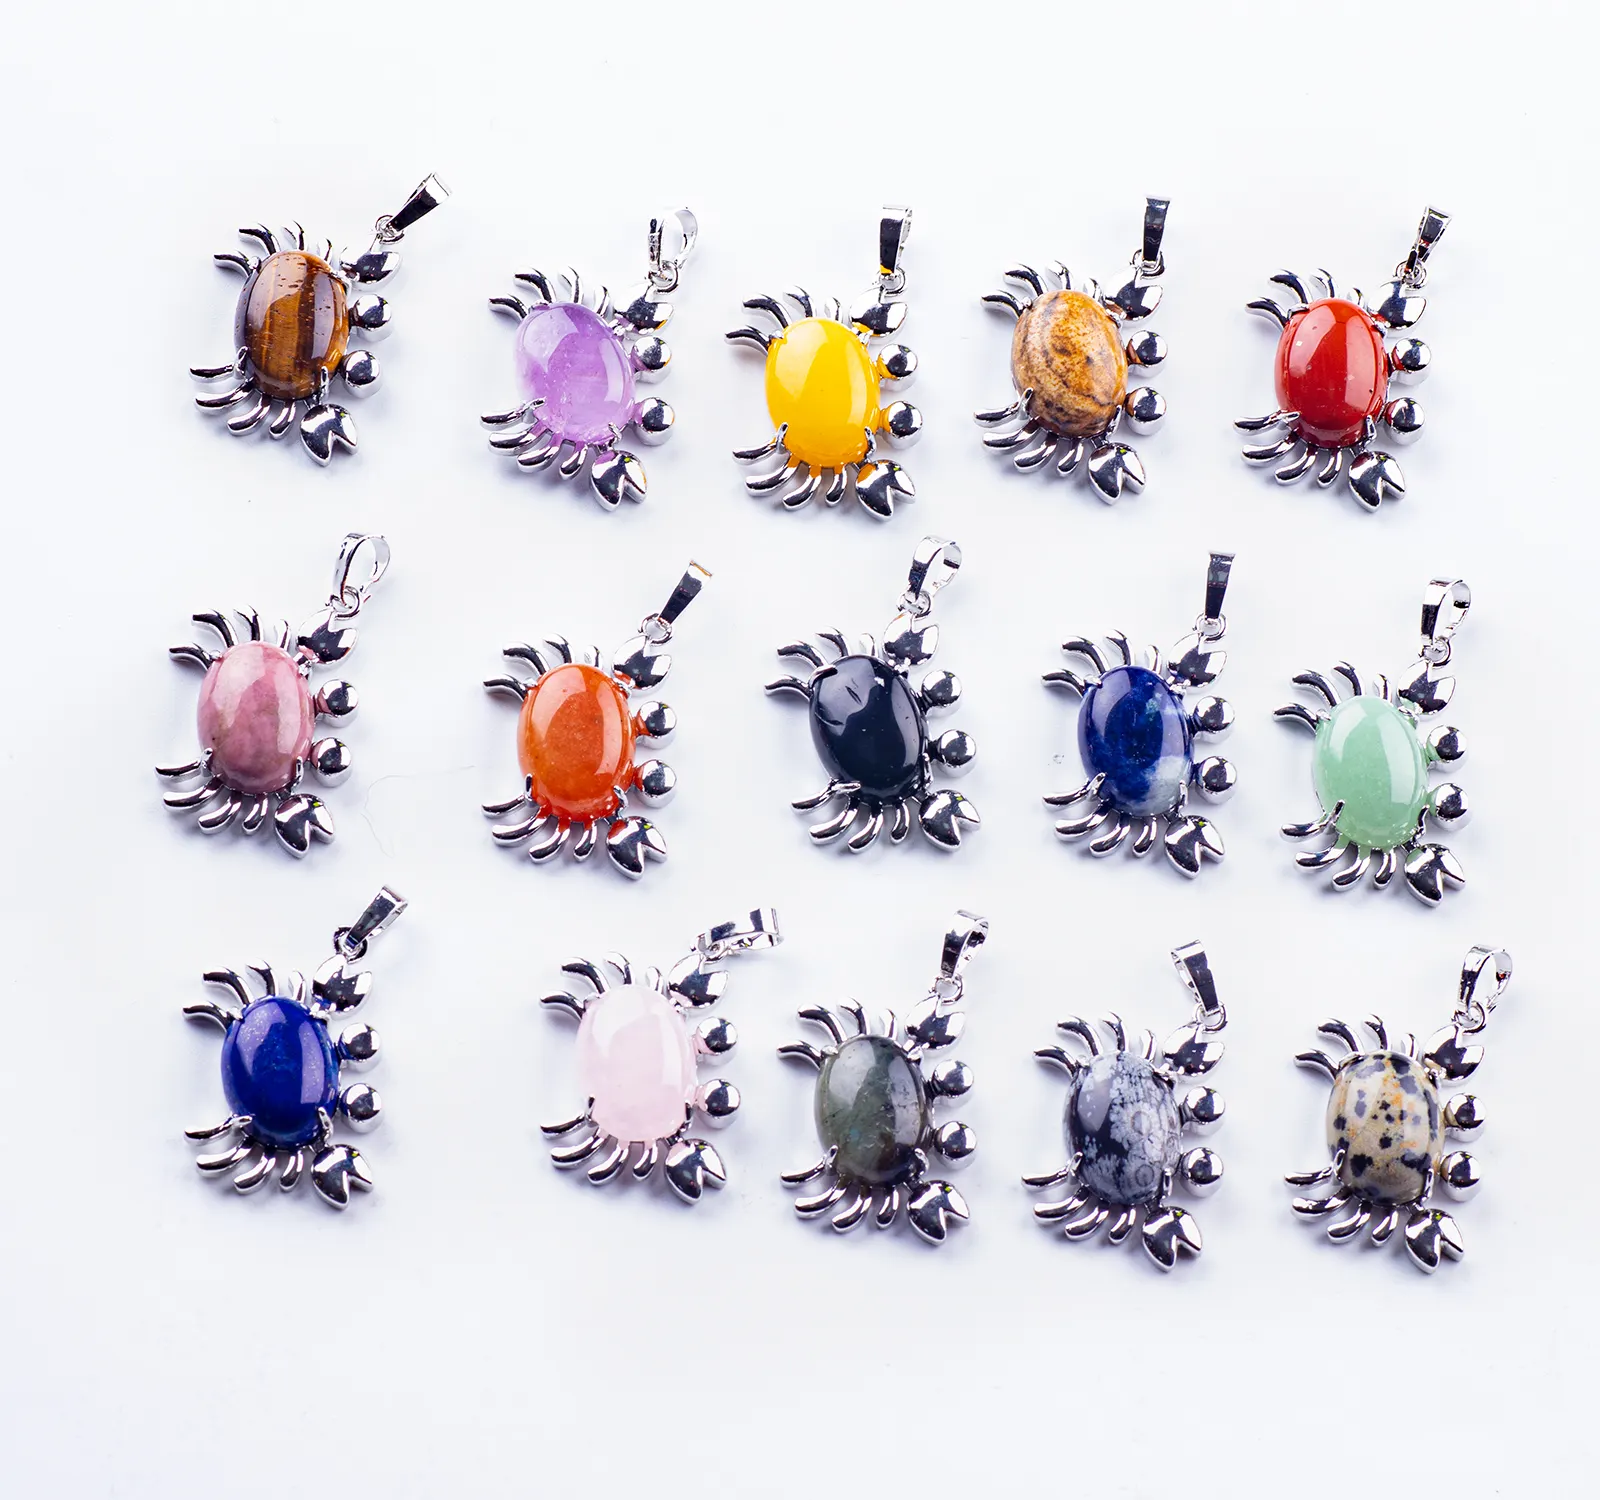 Natural Stone Crab Crystal Pendant Necklace Cabochon Crystal Beads Cute Ocean Animal Necklaces Jewelry for Girl Women Men